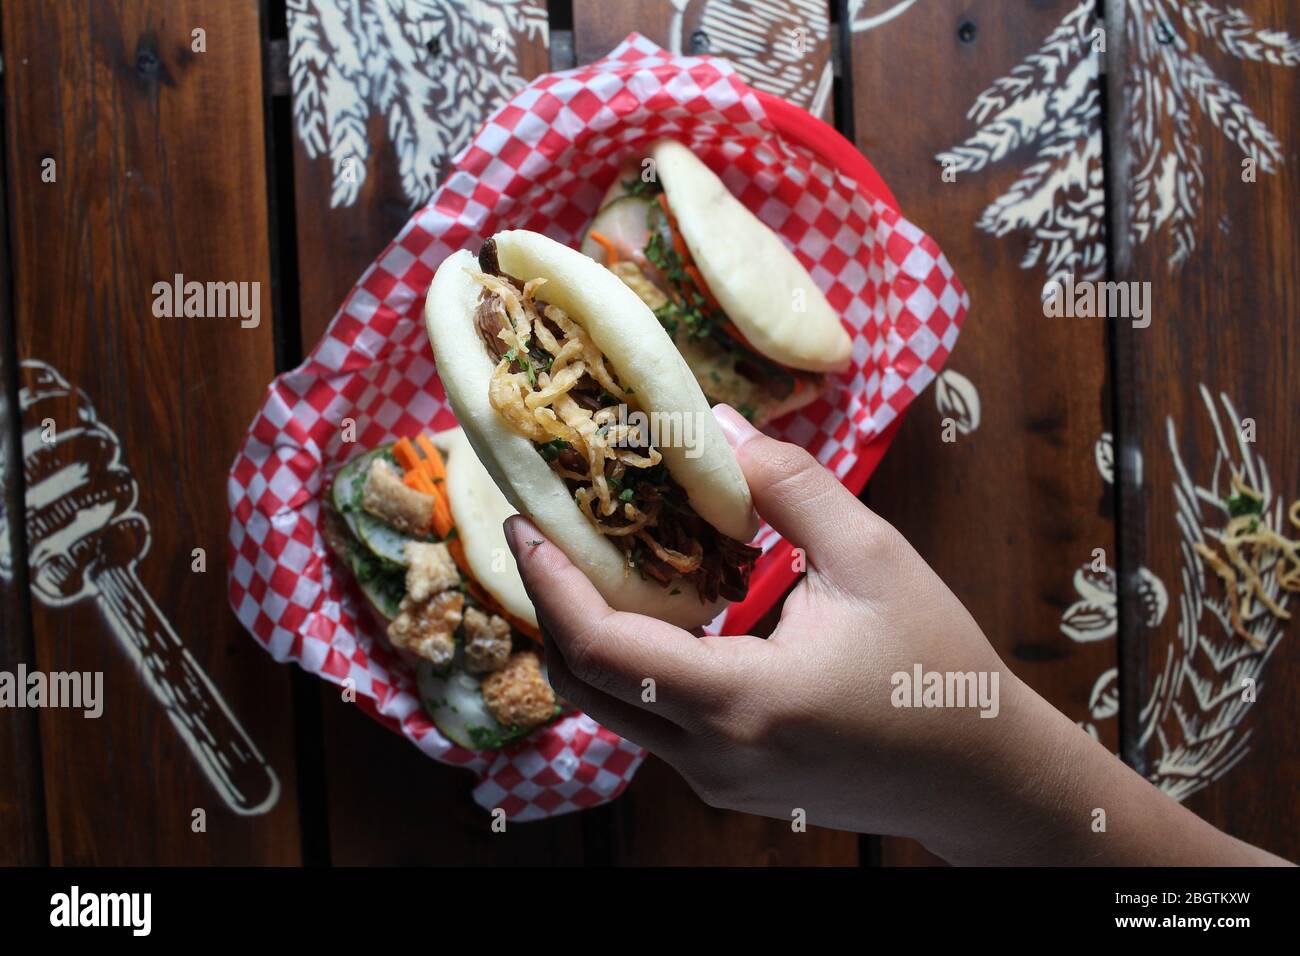 One Bao bun on hand with meat and vegetables Stock Photo